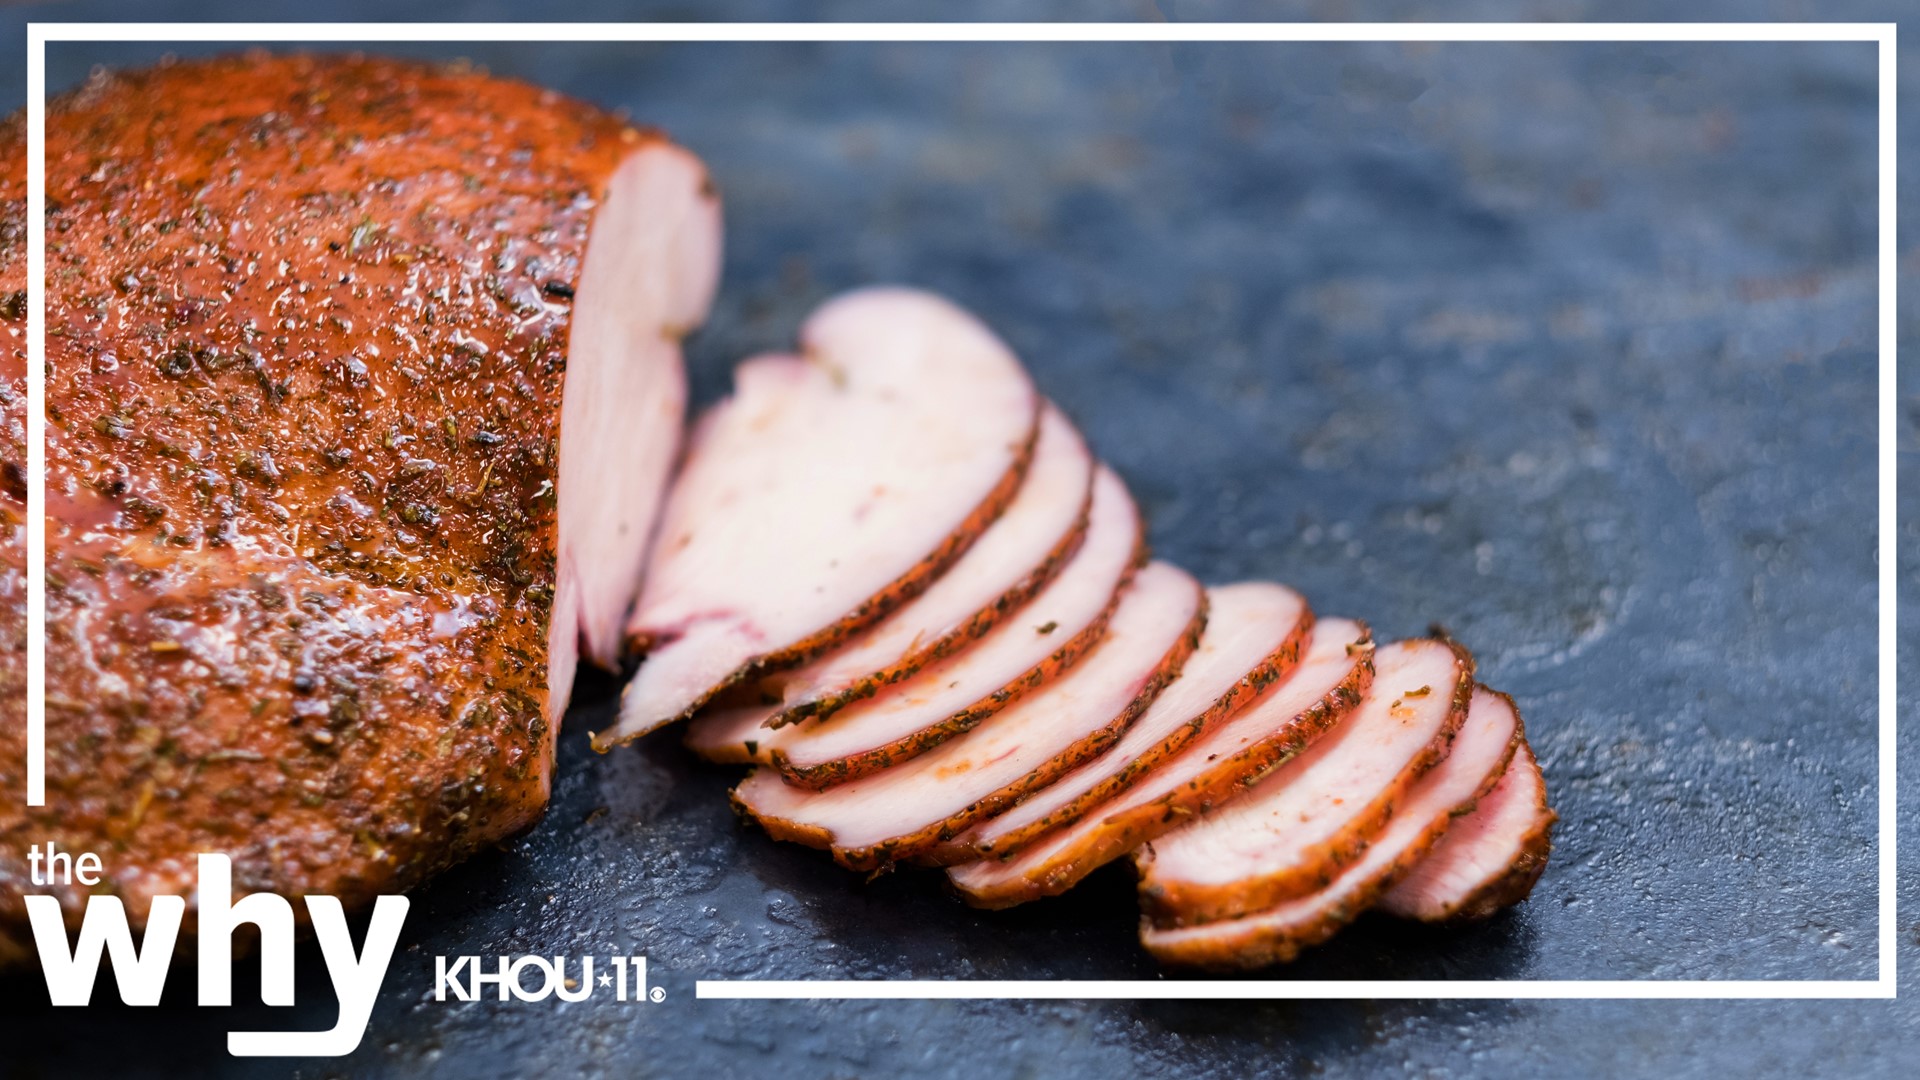 While brisket and sausage are often the stars of any Texas barbecue plate, smoked turkey is a well-loved supporting player.